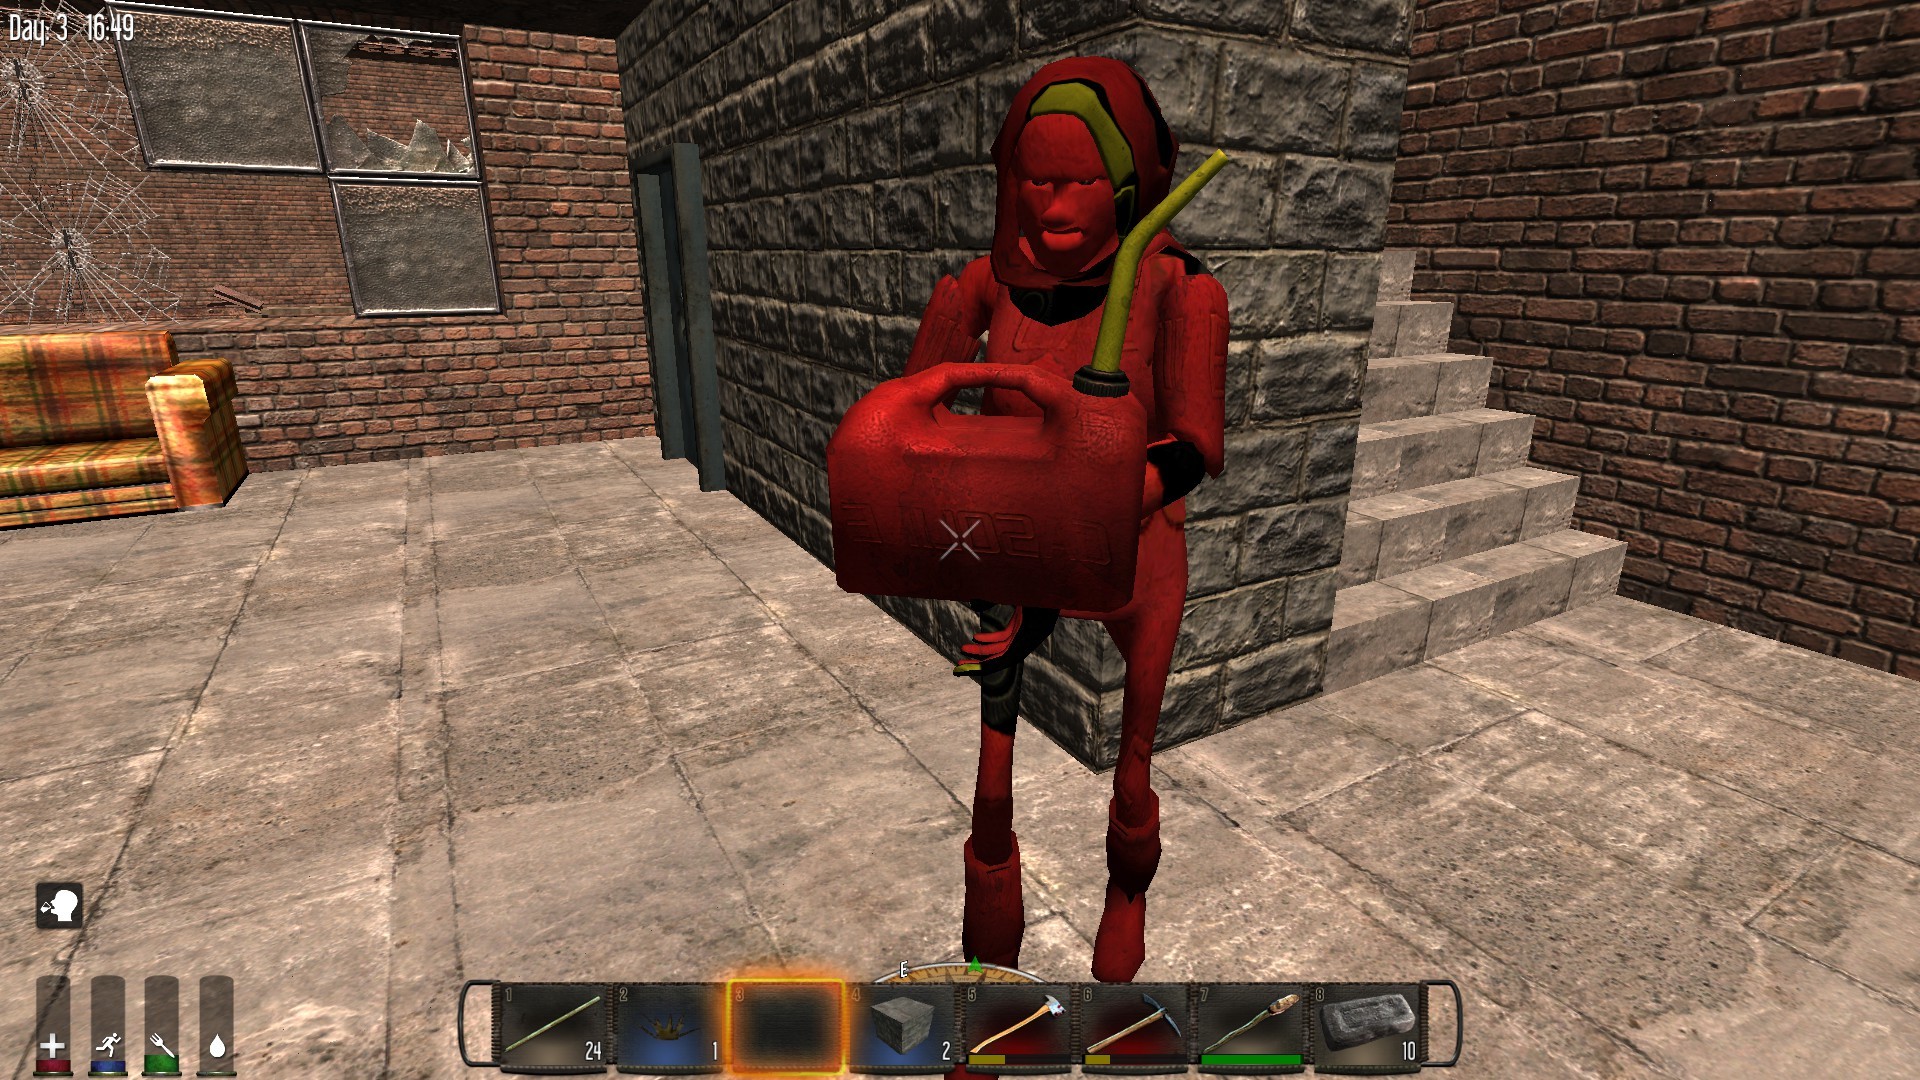 7 Days to Die had a hilarious bug where after the screen was switched to  windowed mode and back, the character texture would change to whatever was  being …